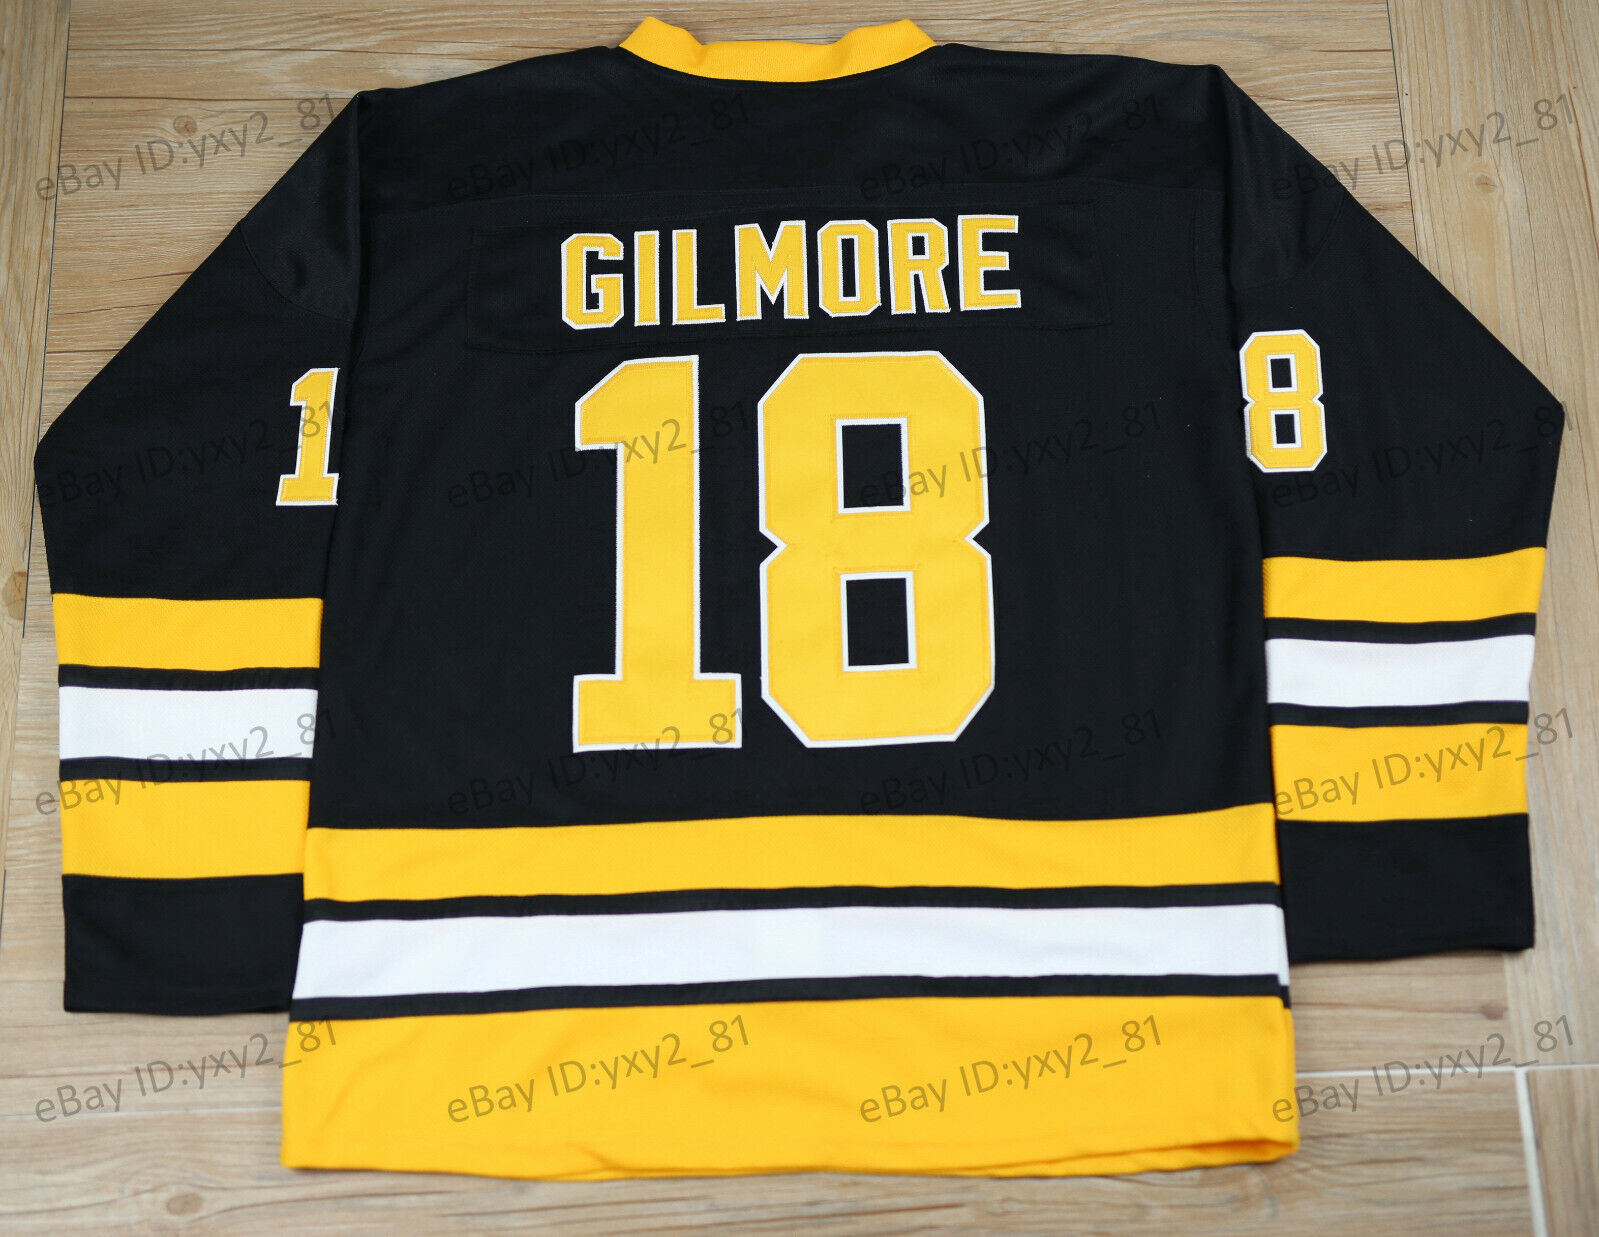 Gilmore 18 Hockey Jersey Essential T-Shirt for Sale by HutchLA